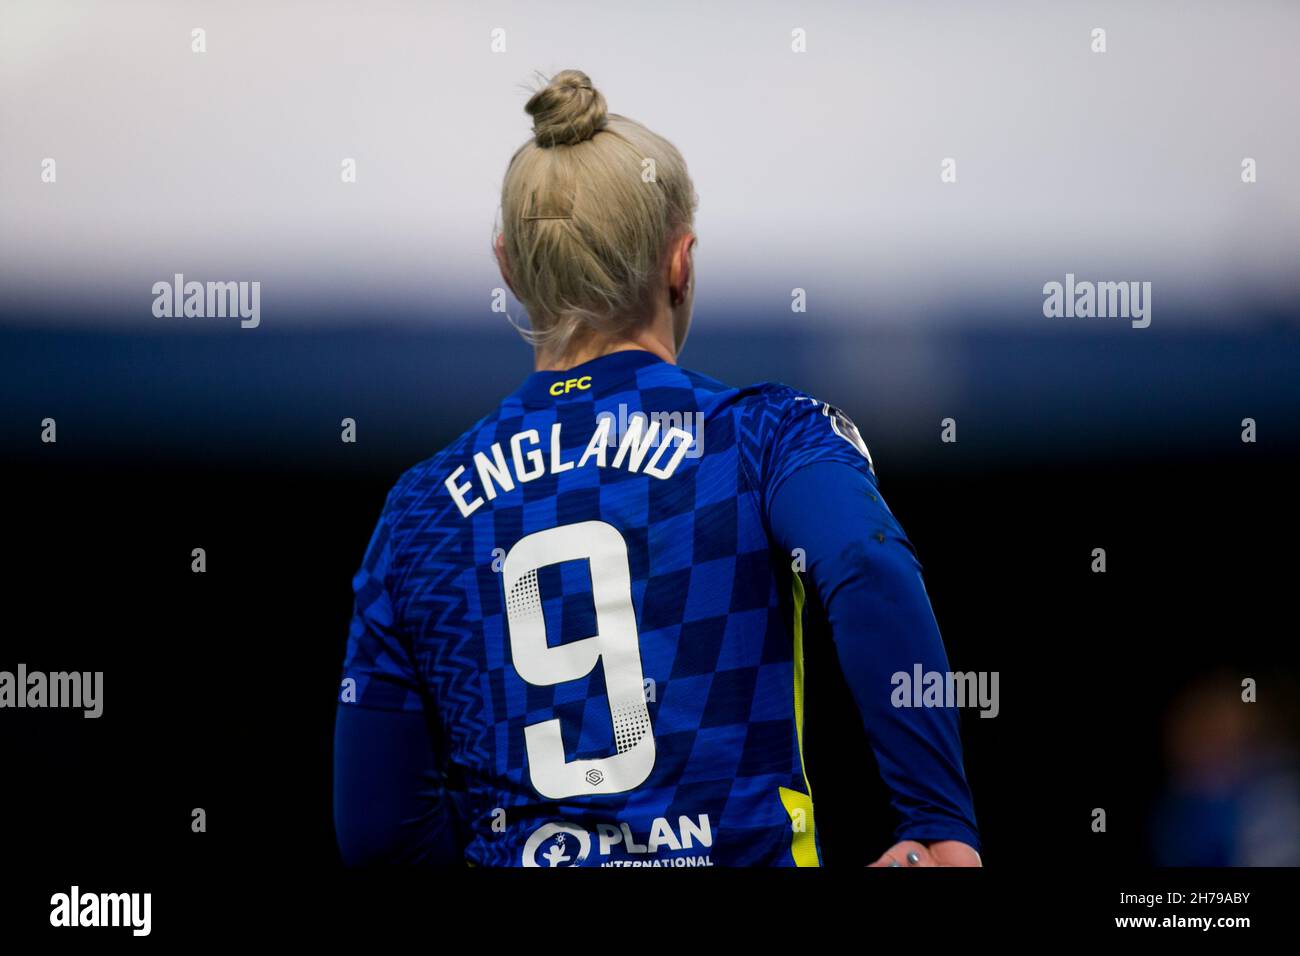 London, UK. 21st Nov, 2021. LONDON, UK. NOVEMBER 21ST : Bethany England of Chelsea FC looks on during the 2021-22 FA Womens Superleague fixture between Chelsea FC and Birmingham City at Kingsmeadow. Credit: Federico Guerra Morán/Alamy Live News Stock Photo